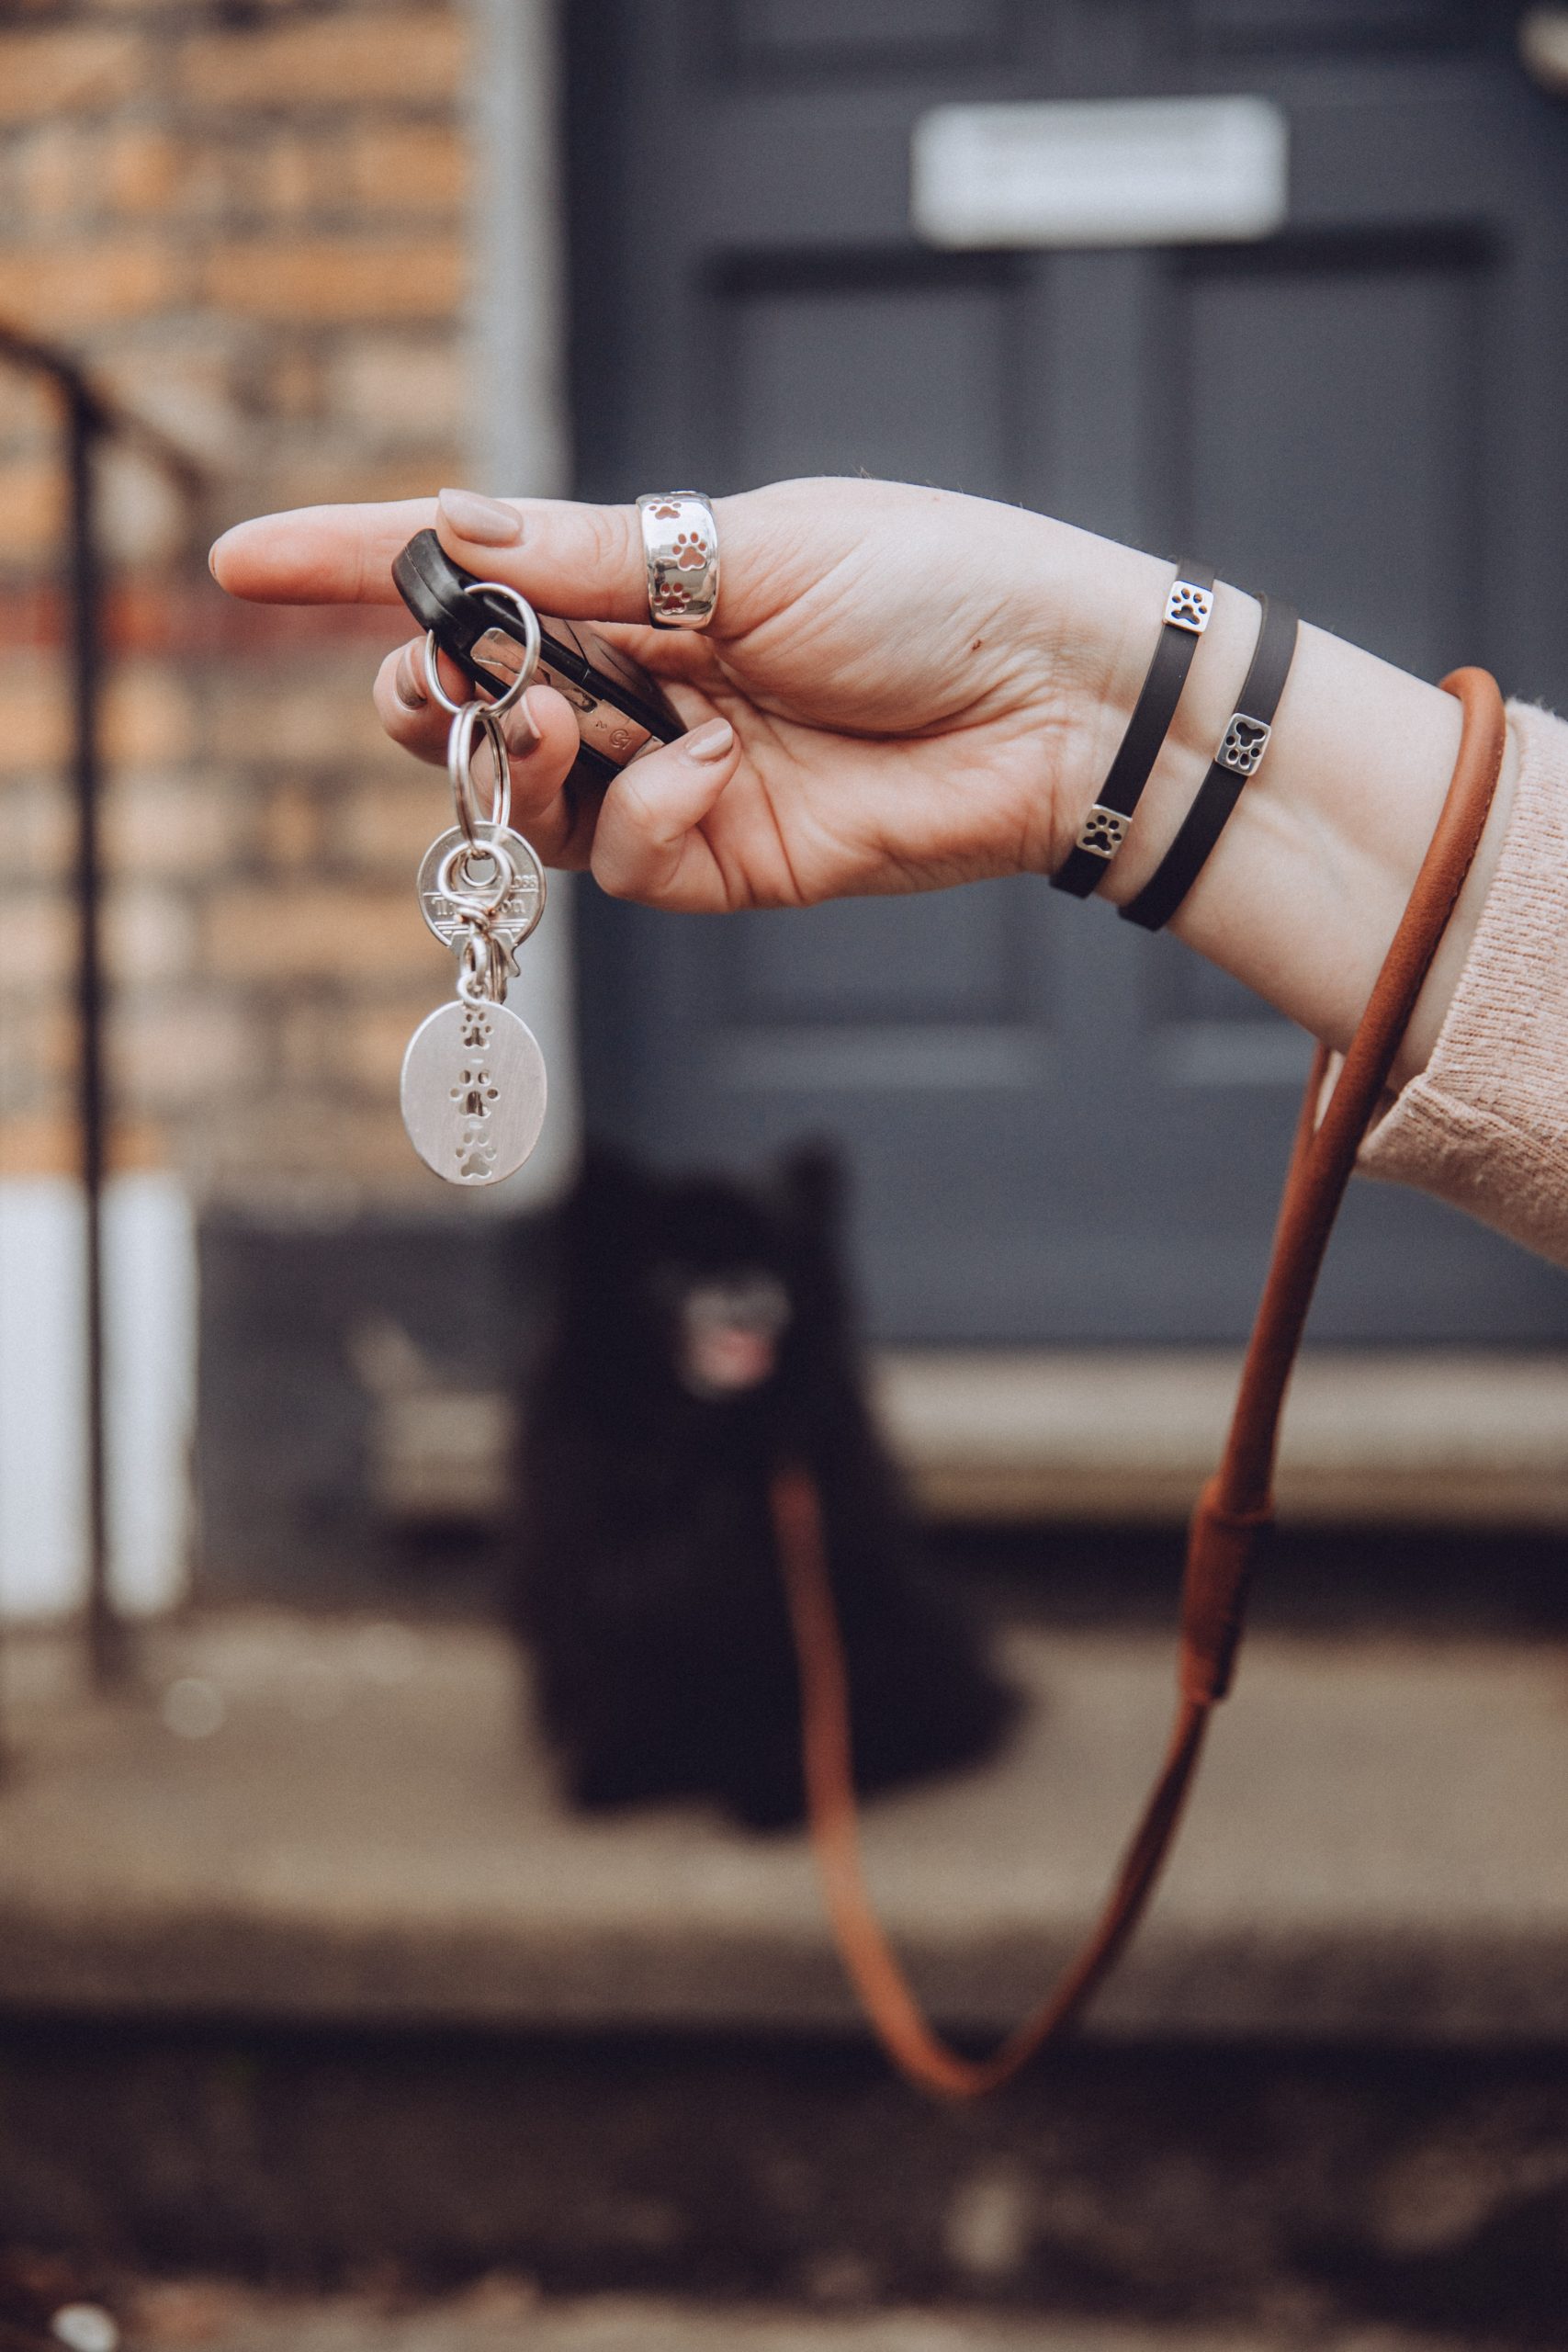 Silver key ring attached to car keys, while Kimberly wears the silver paw print ring, and rubber paw print bracelets